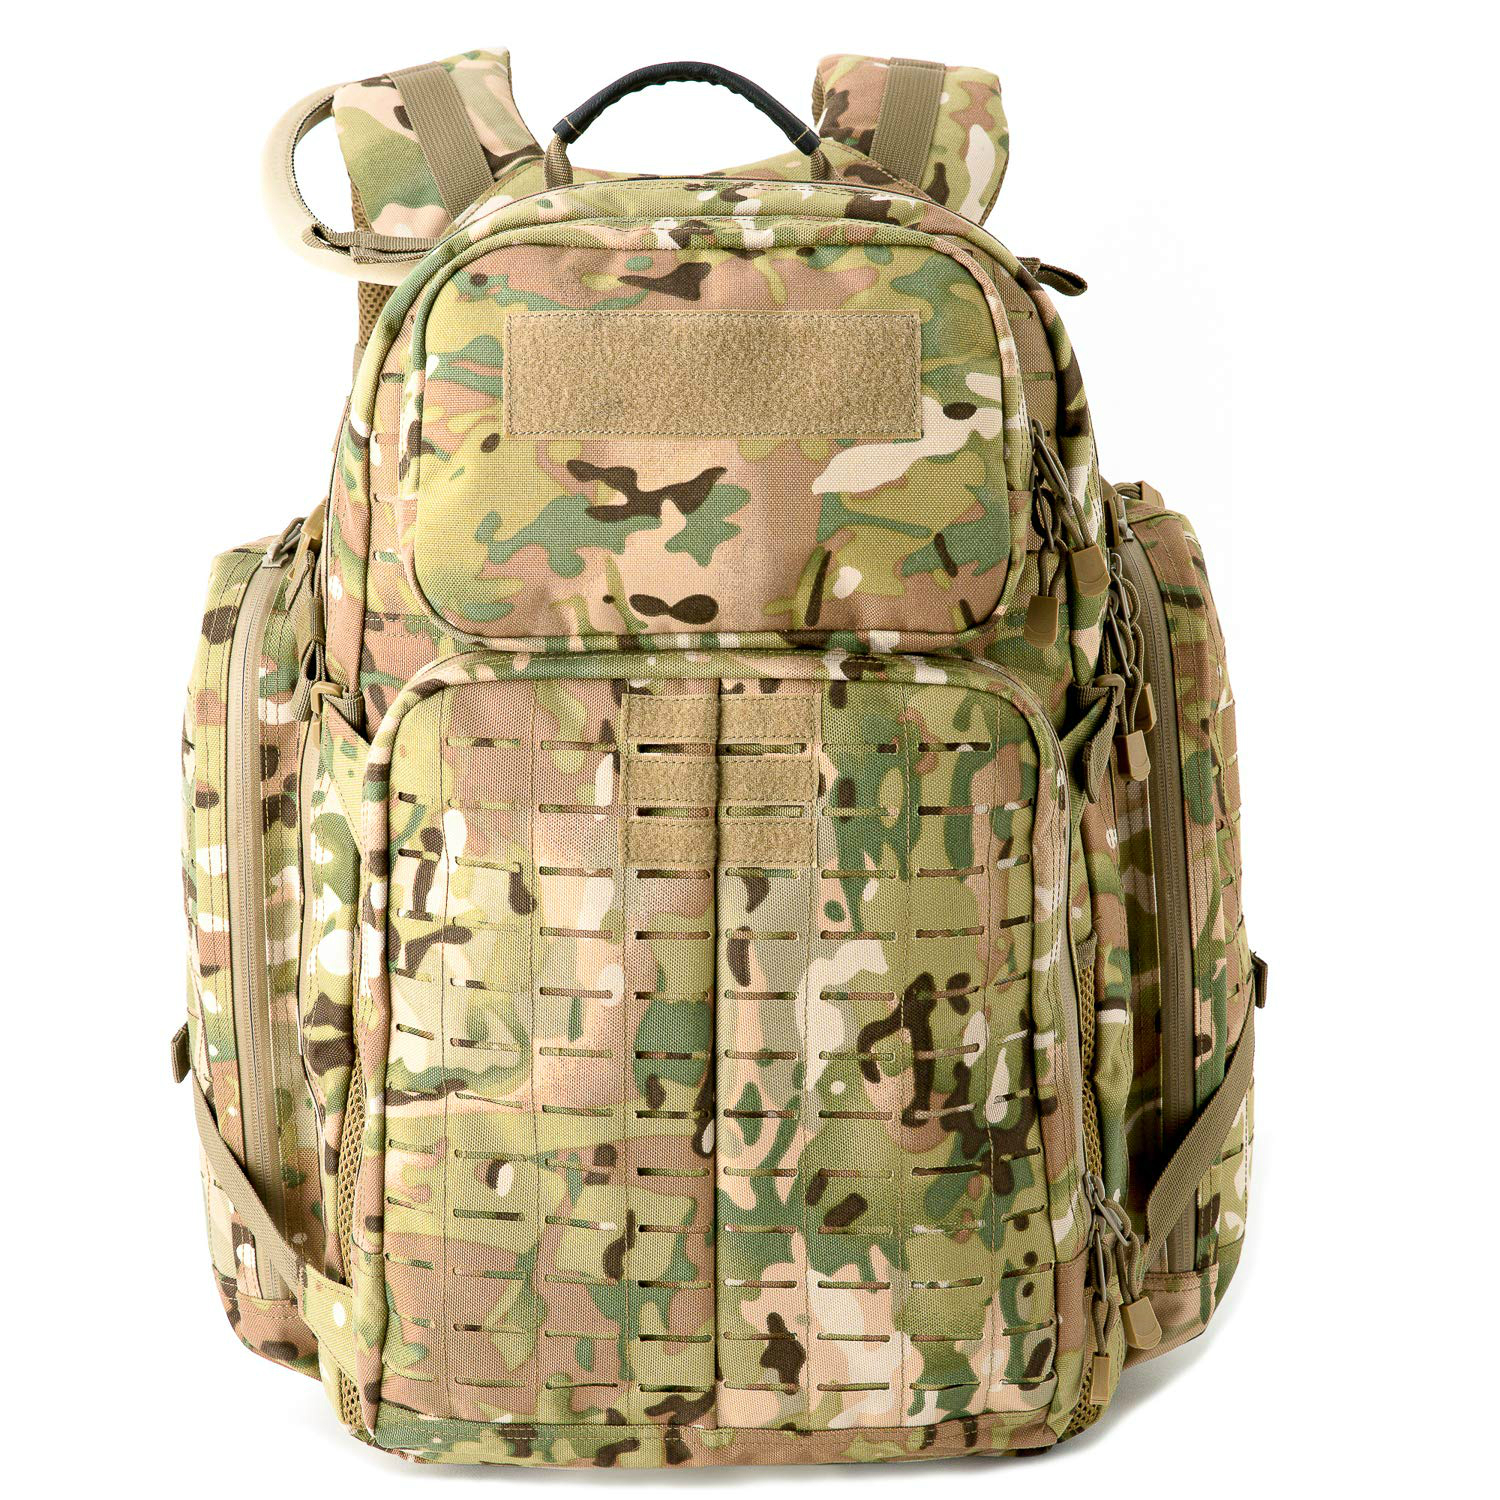 Details about   Military 2 in 1 90L Rucksack 10L Backpack Camouflage Modular NEW! 